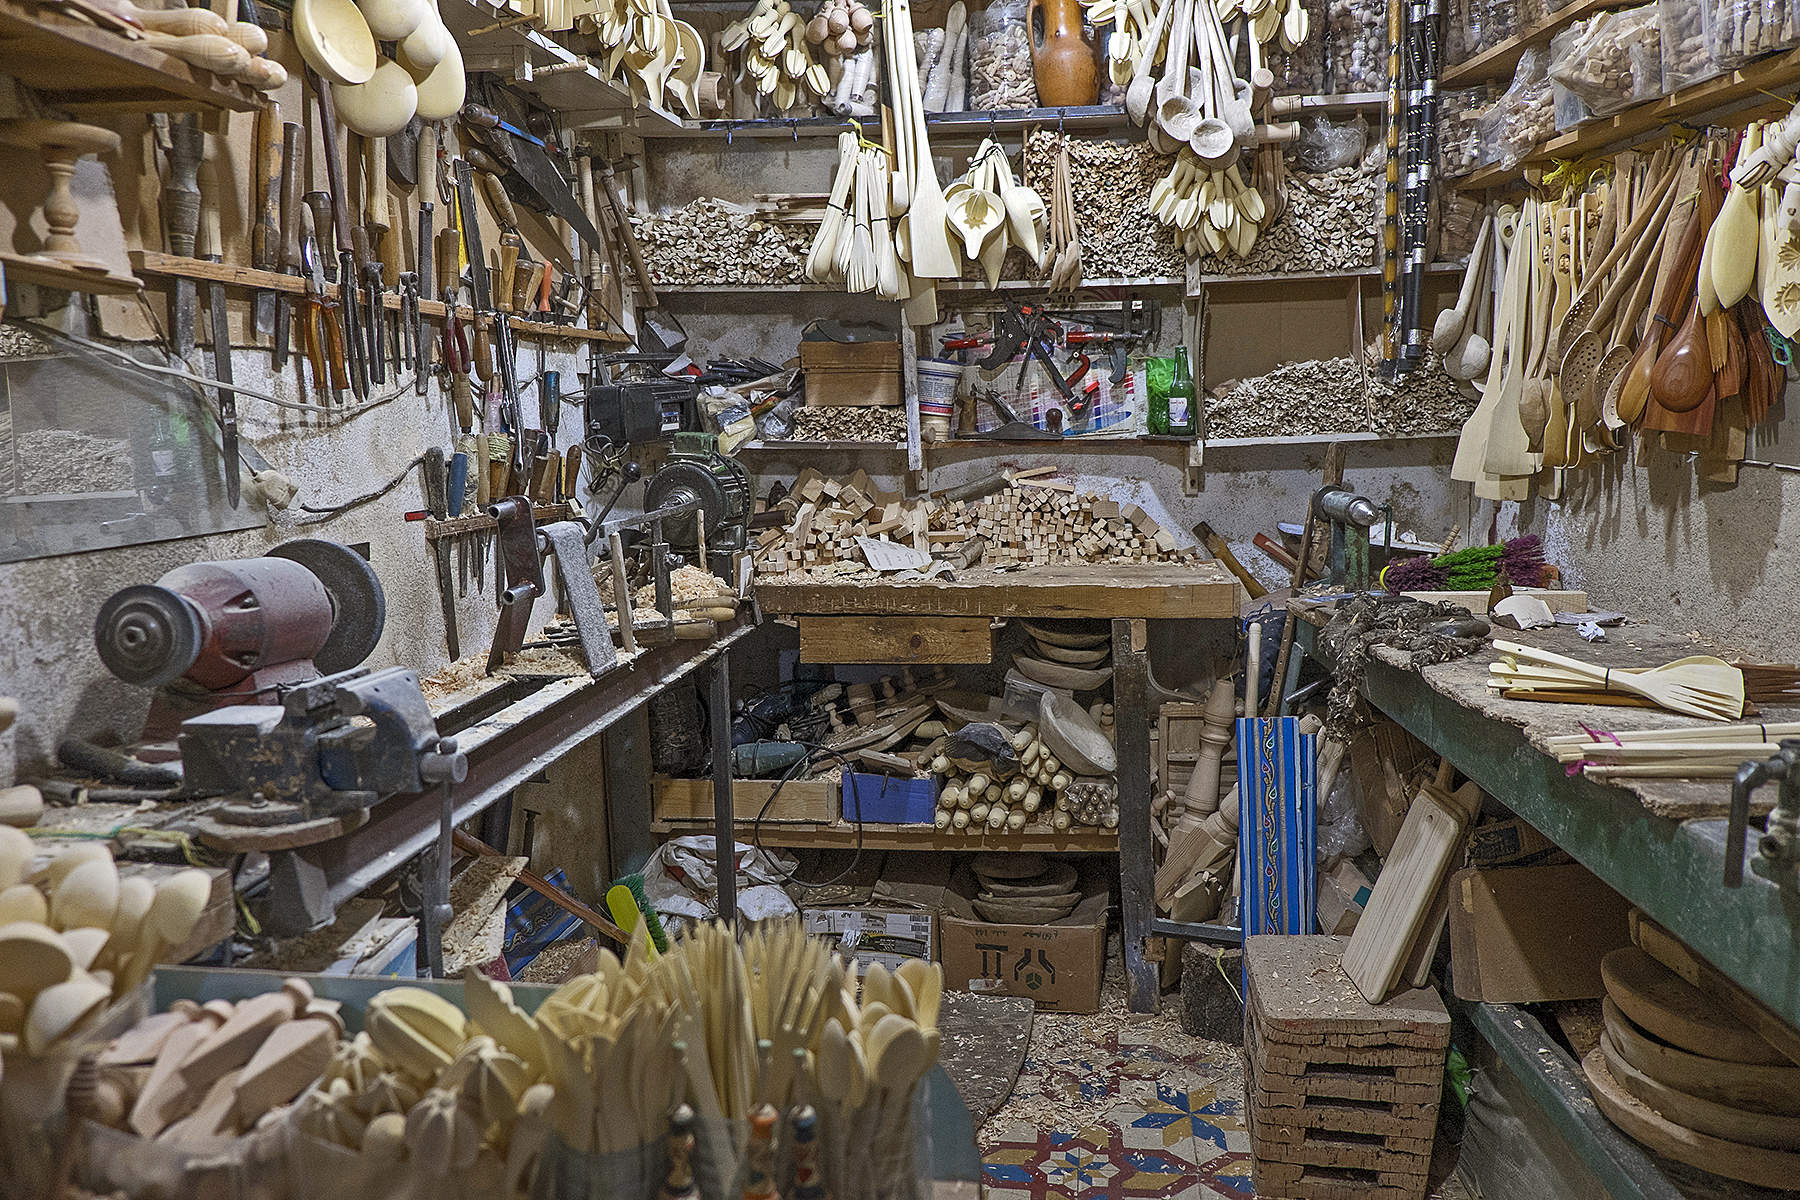 Woodworkers Shop, Chefchauen, Morocco<p><a class="nav-link" href="/content.html?page=6/#TA24" target="_top">Thumbnail</a>